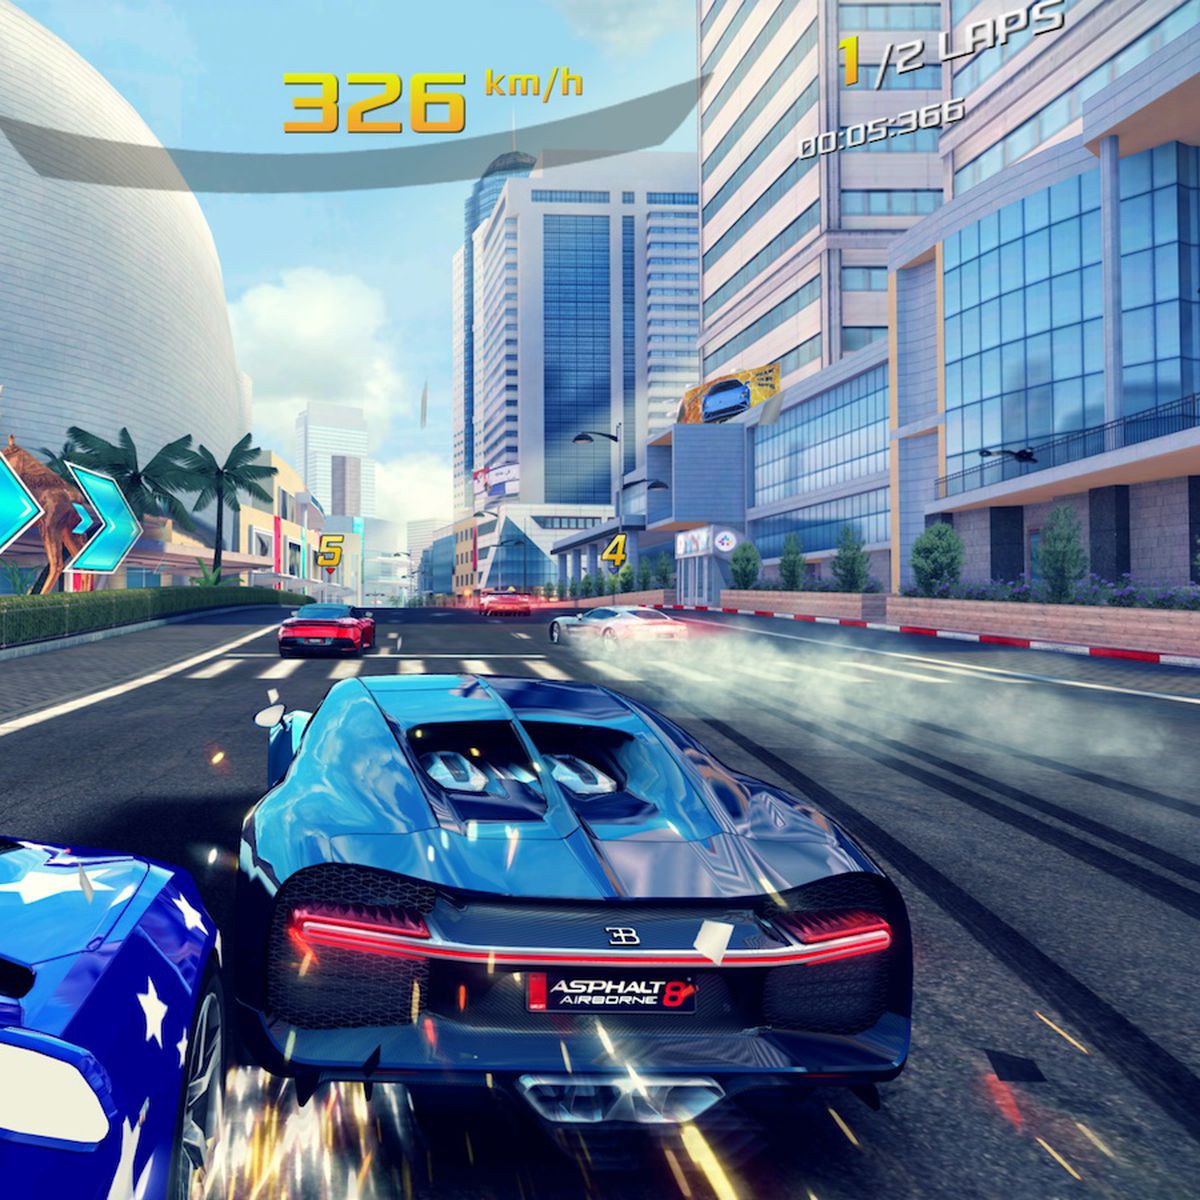 barm telex væv Two New Games Coming to Apple Arcade, Including Gameloft's Racing Classic 'Asphalt  8: Airborne' - MacRumors